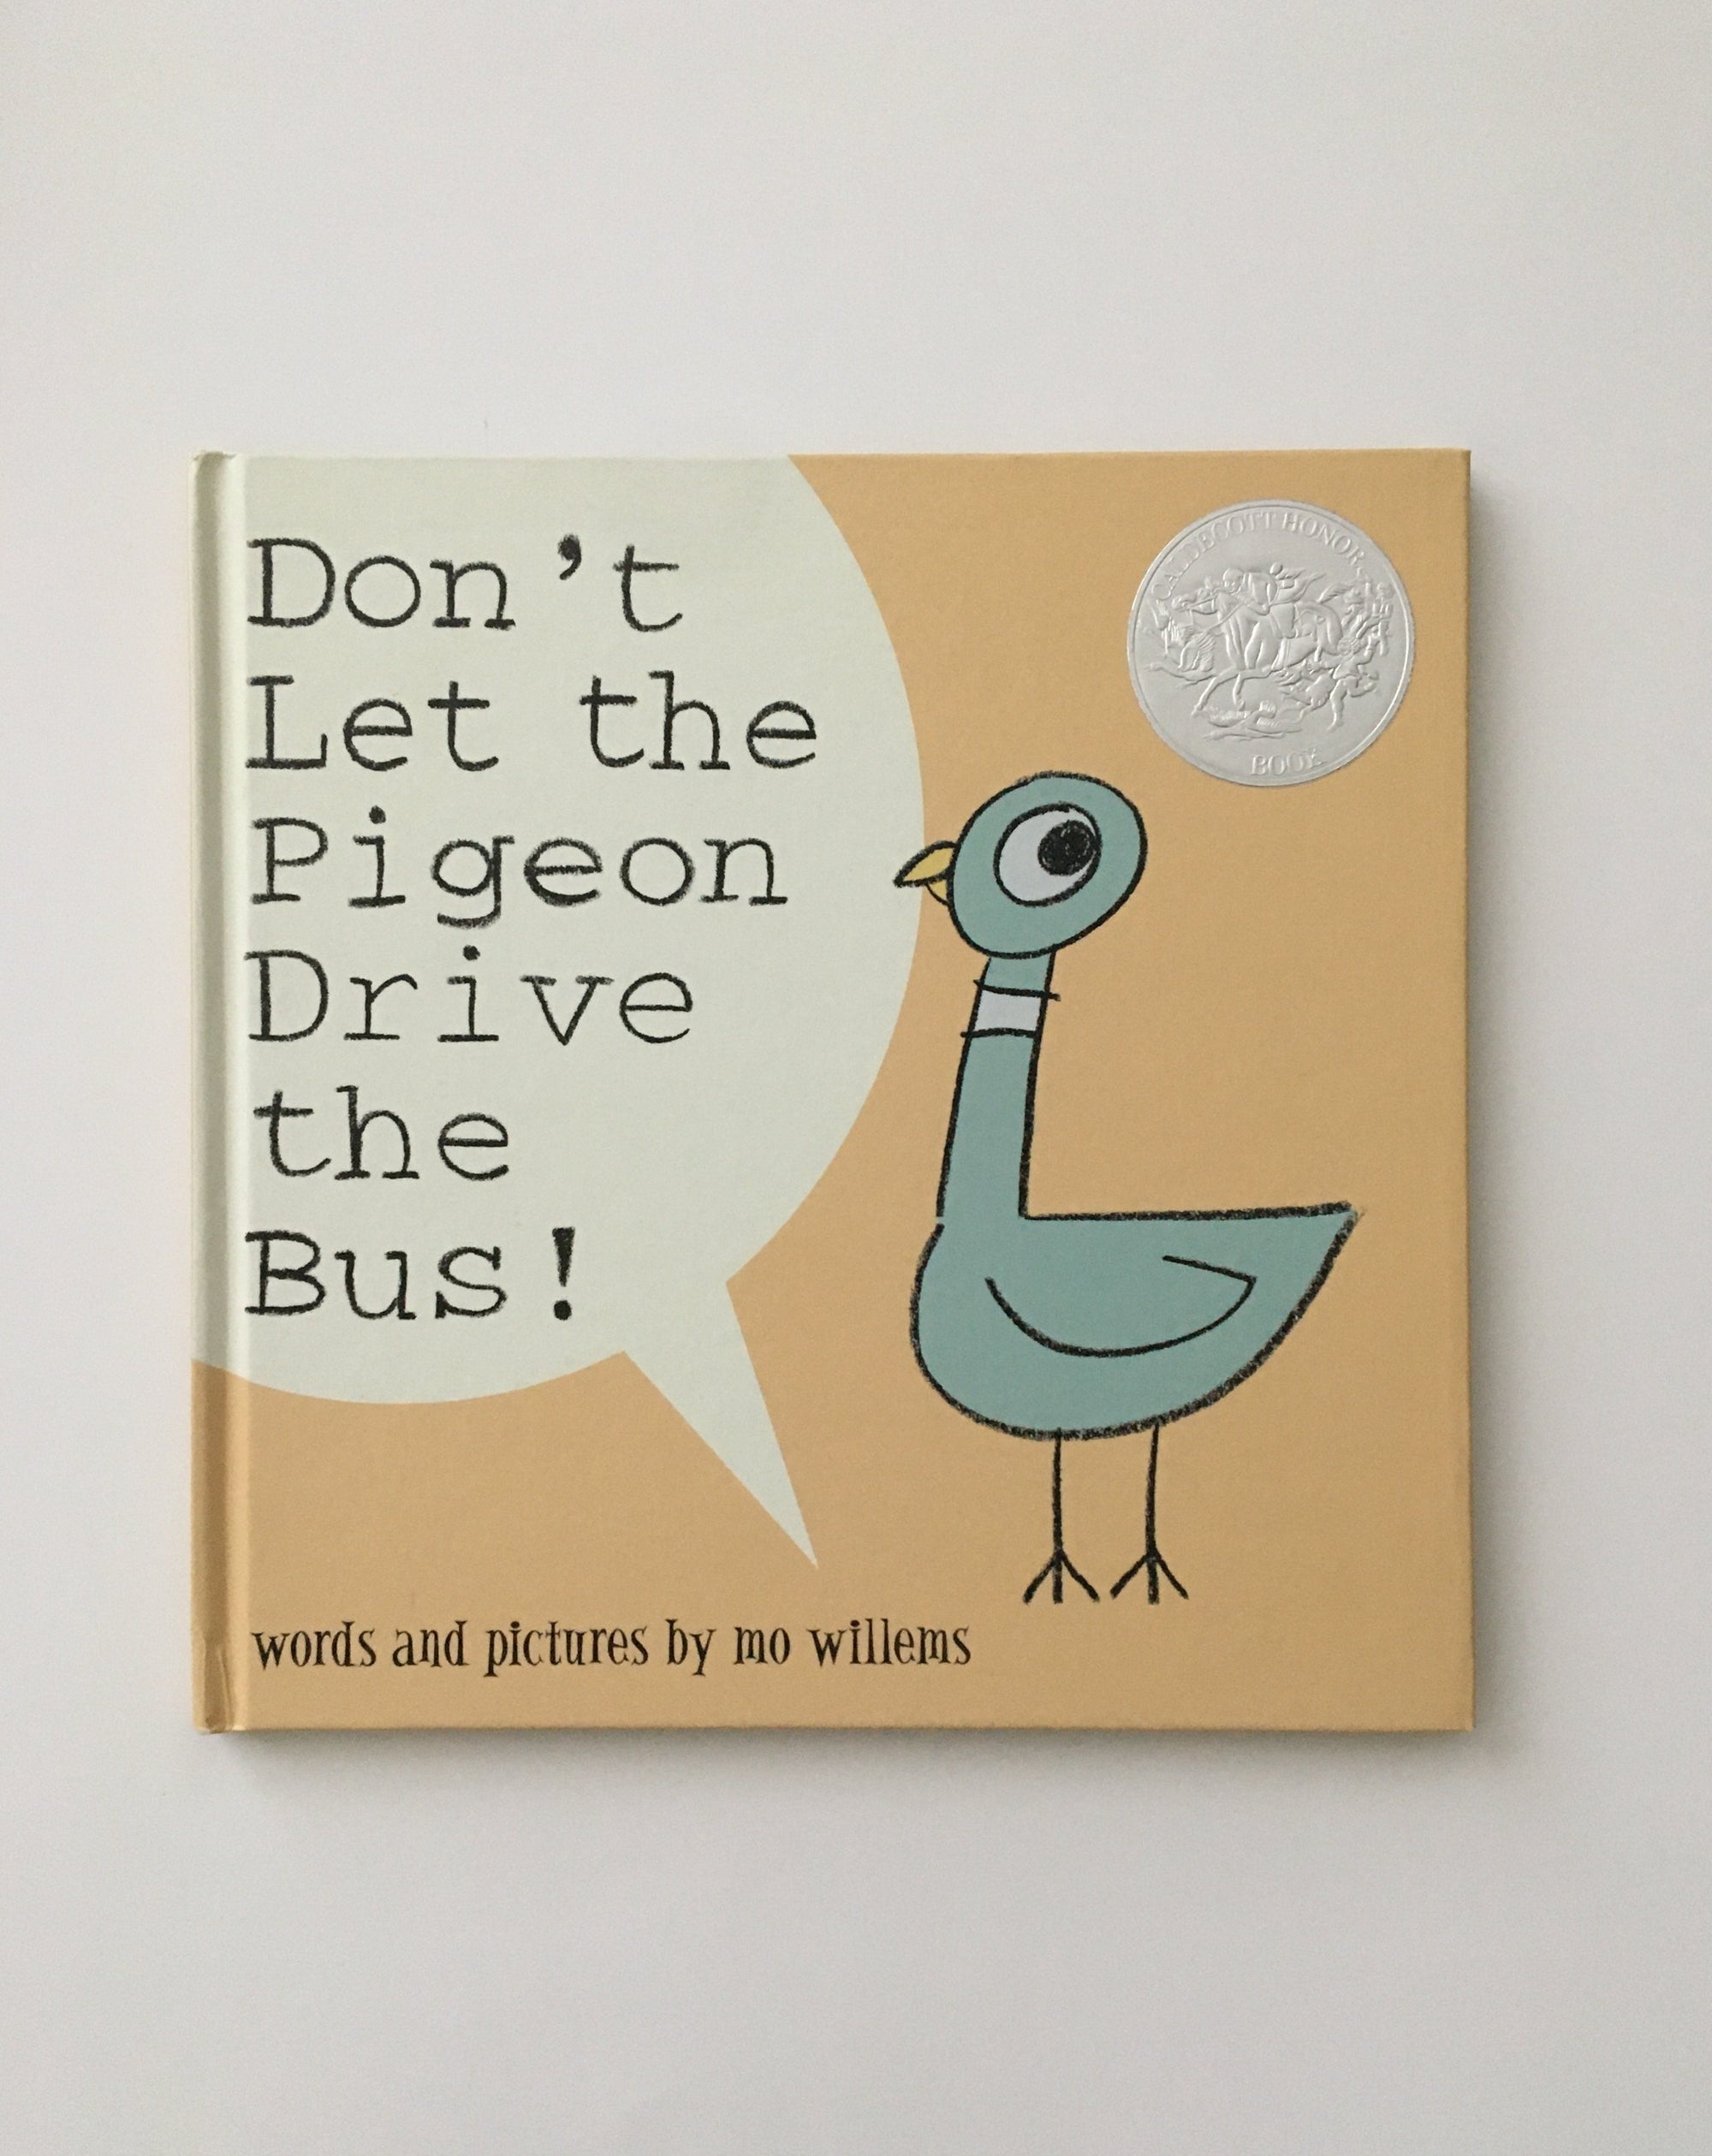 Don't Let the Pigeon Drive the bus by Mo Willems, book, Ten Dollar Books, Ten Dollar Books